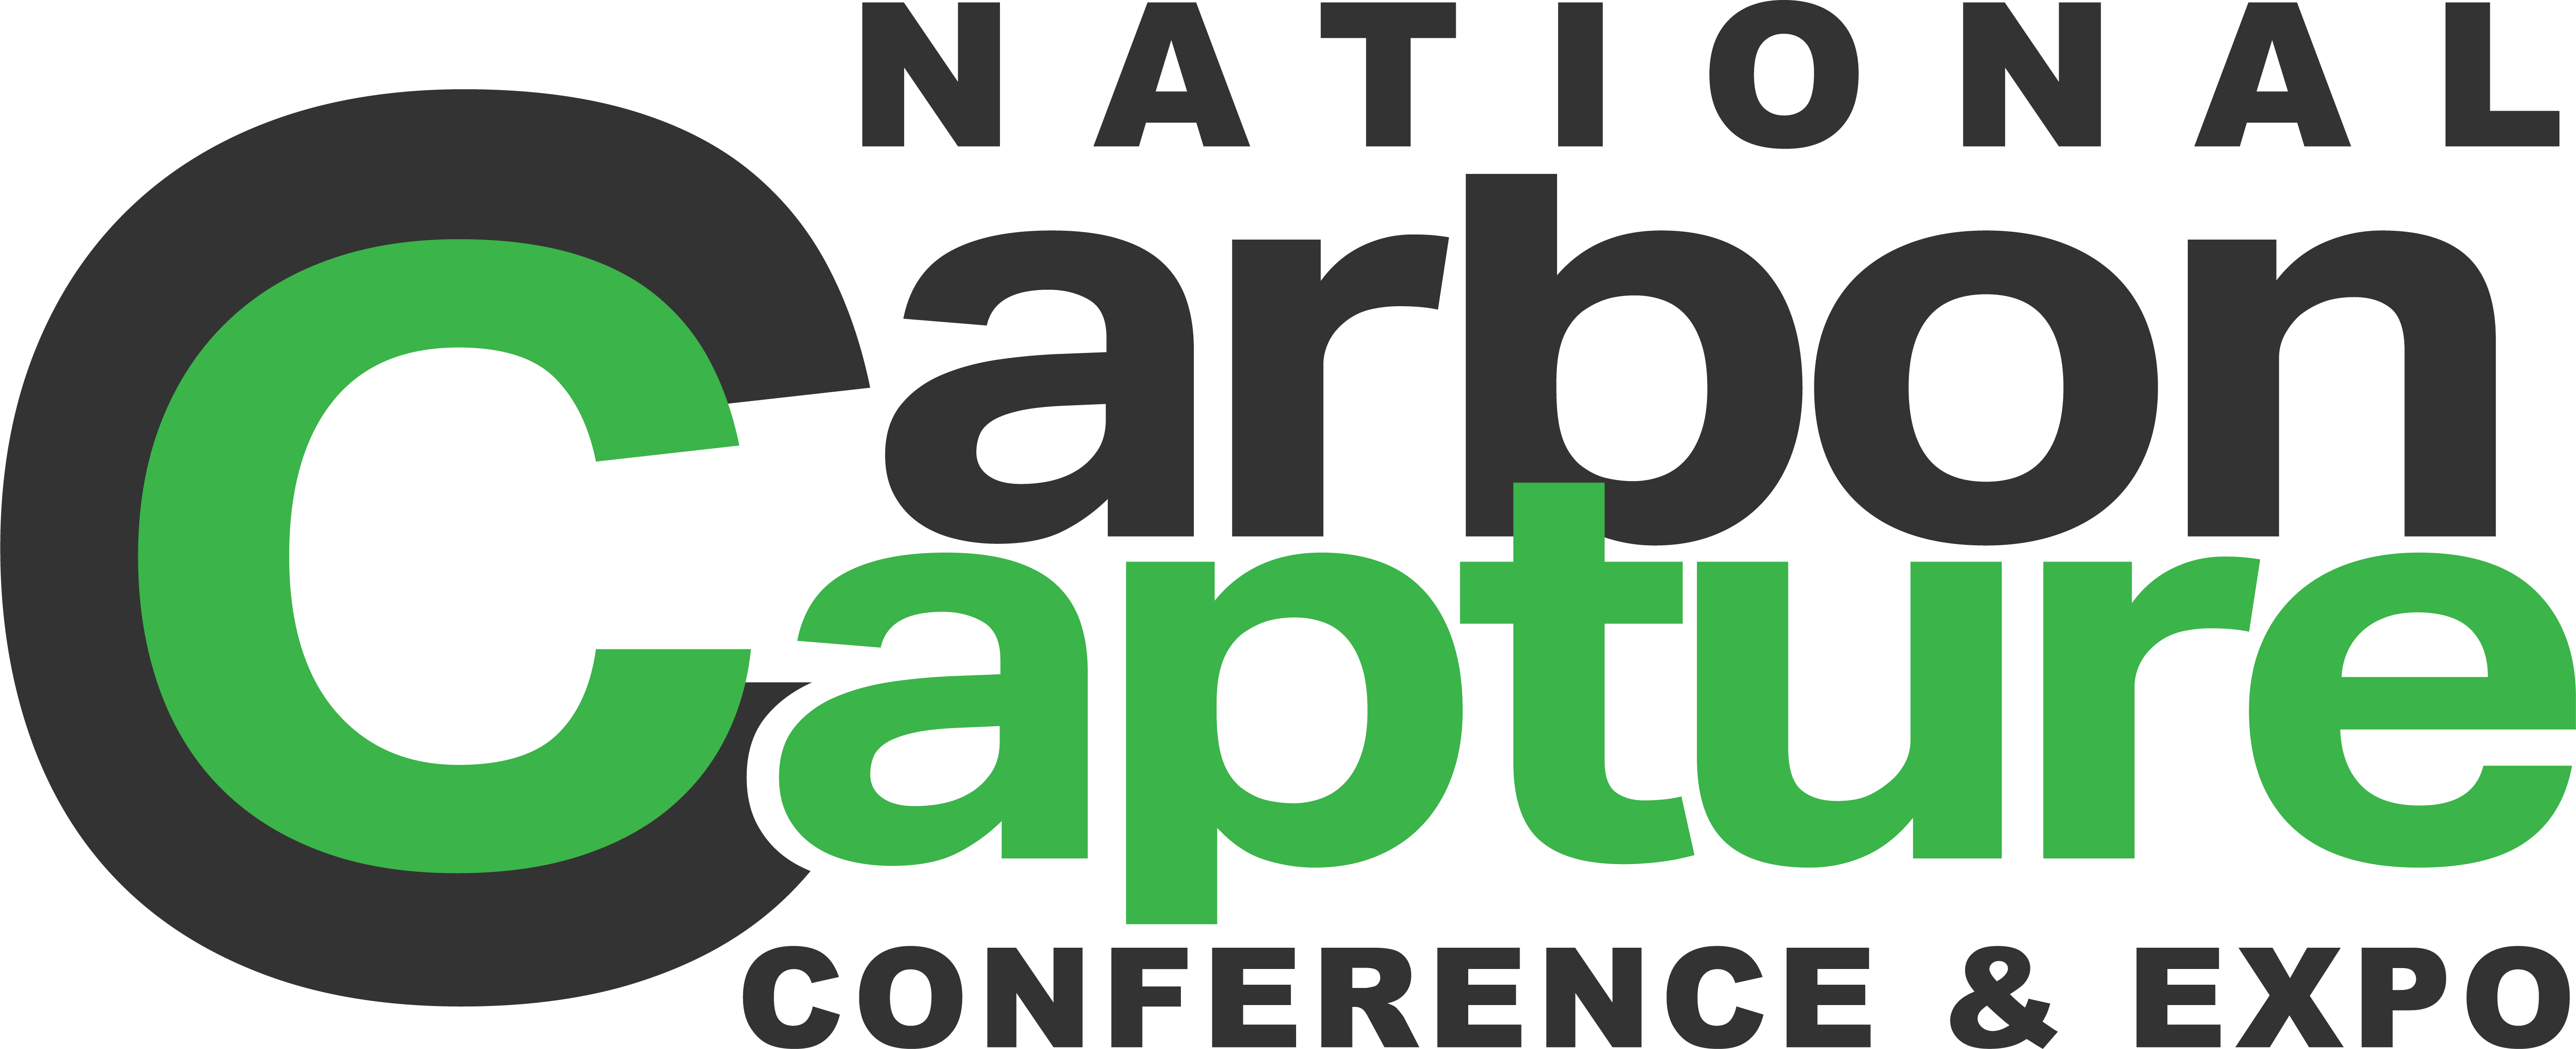 National Carbon Capture Conference & Expo